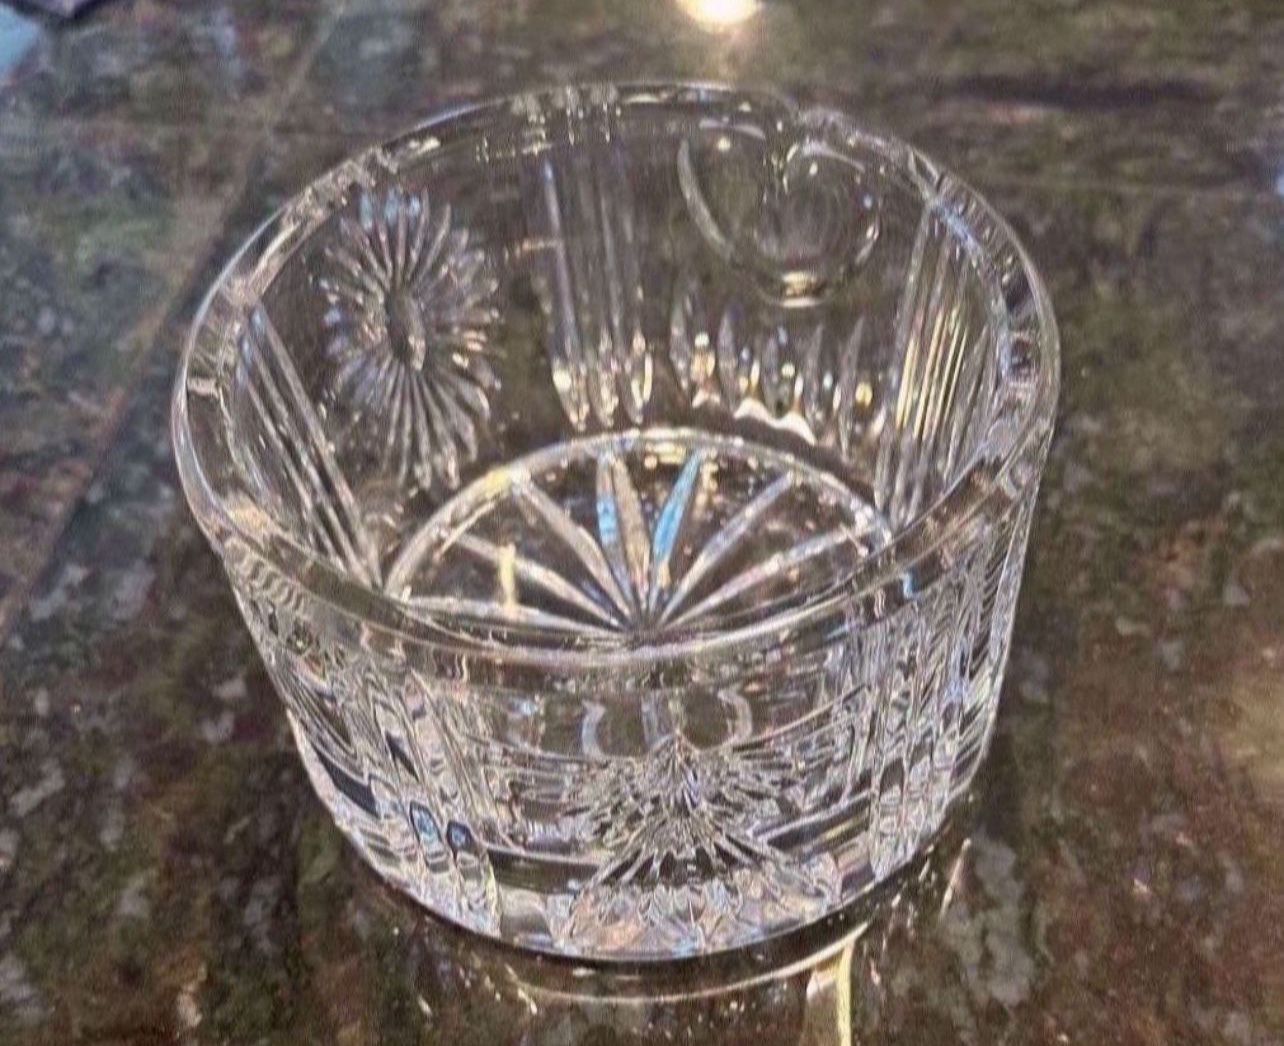 Waterford Crystal Champagne Coaster Millennium Collection 